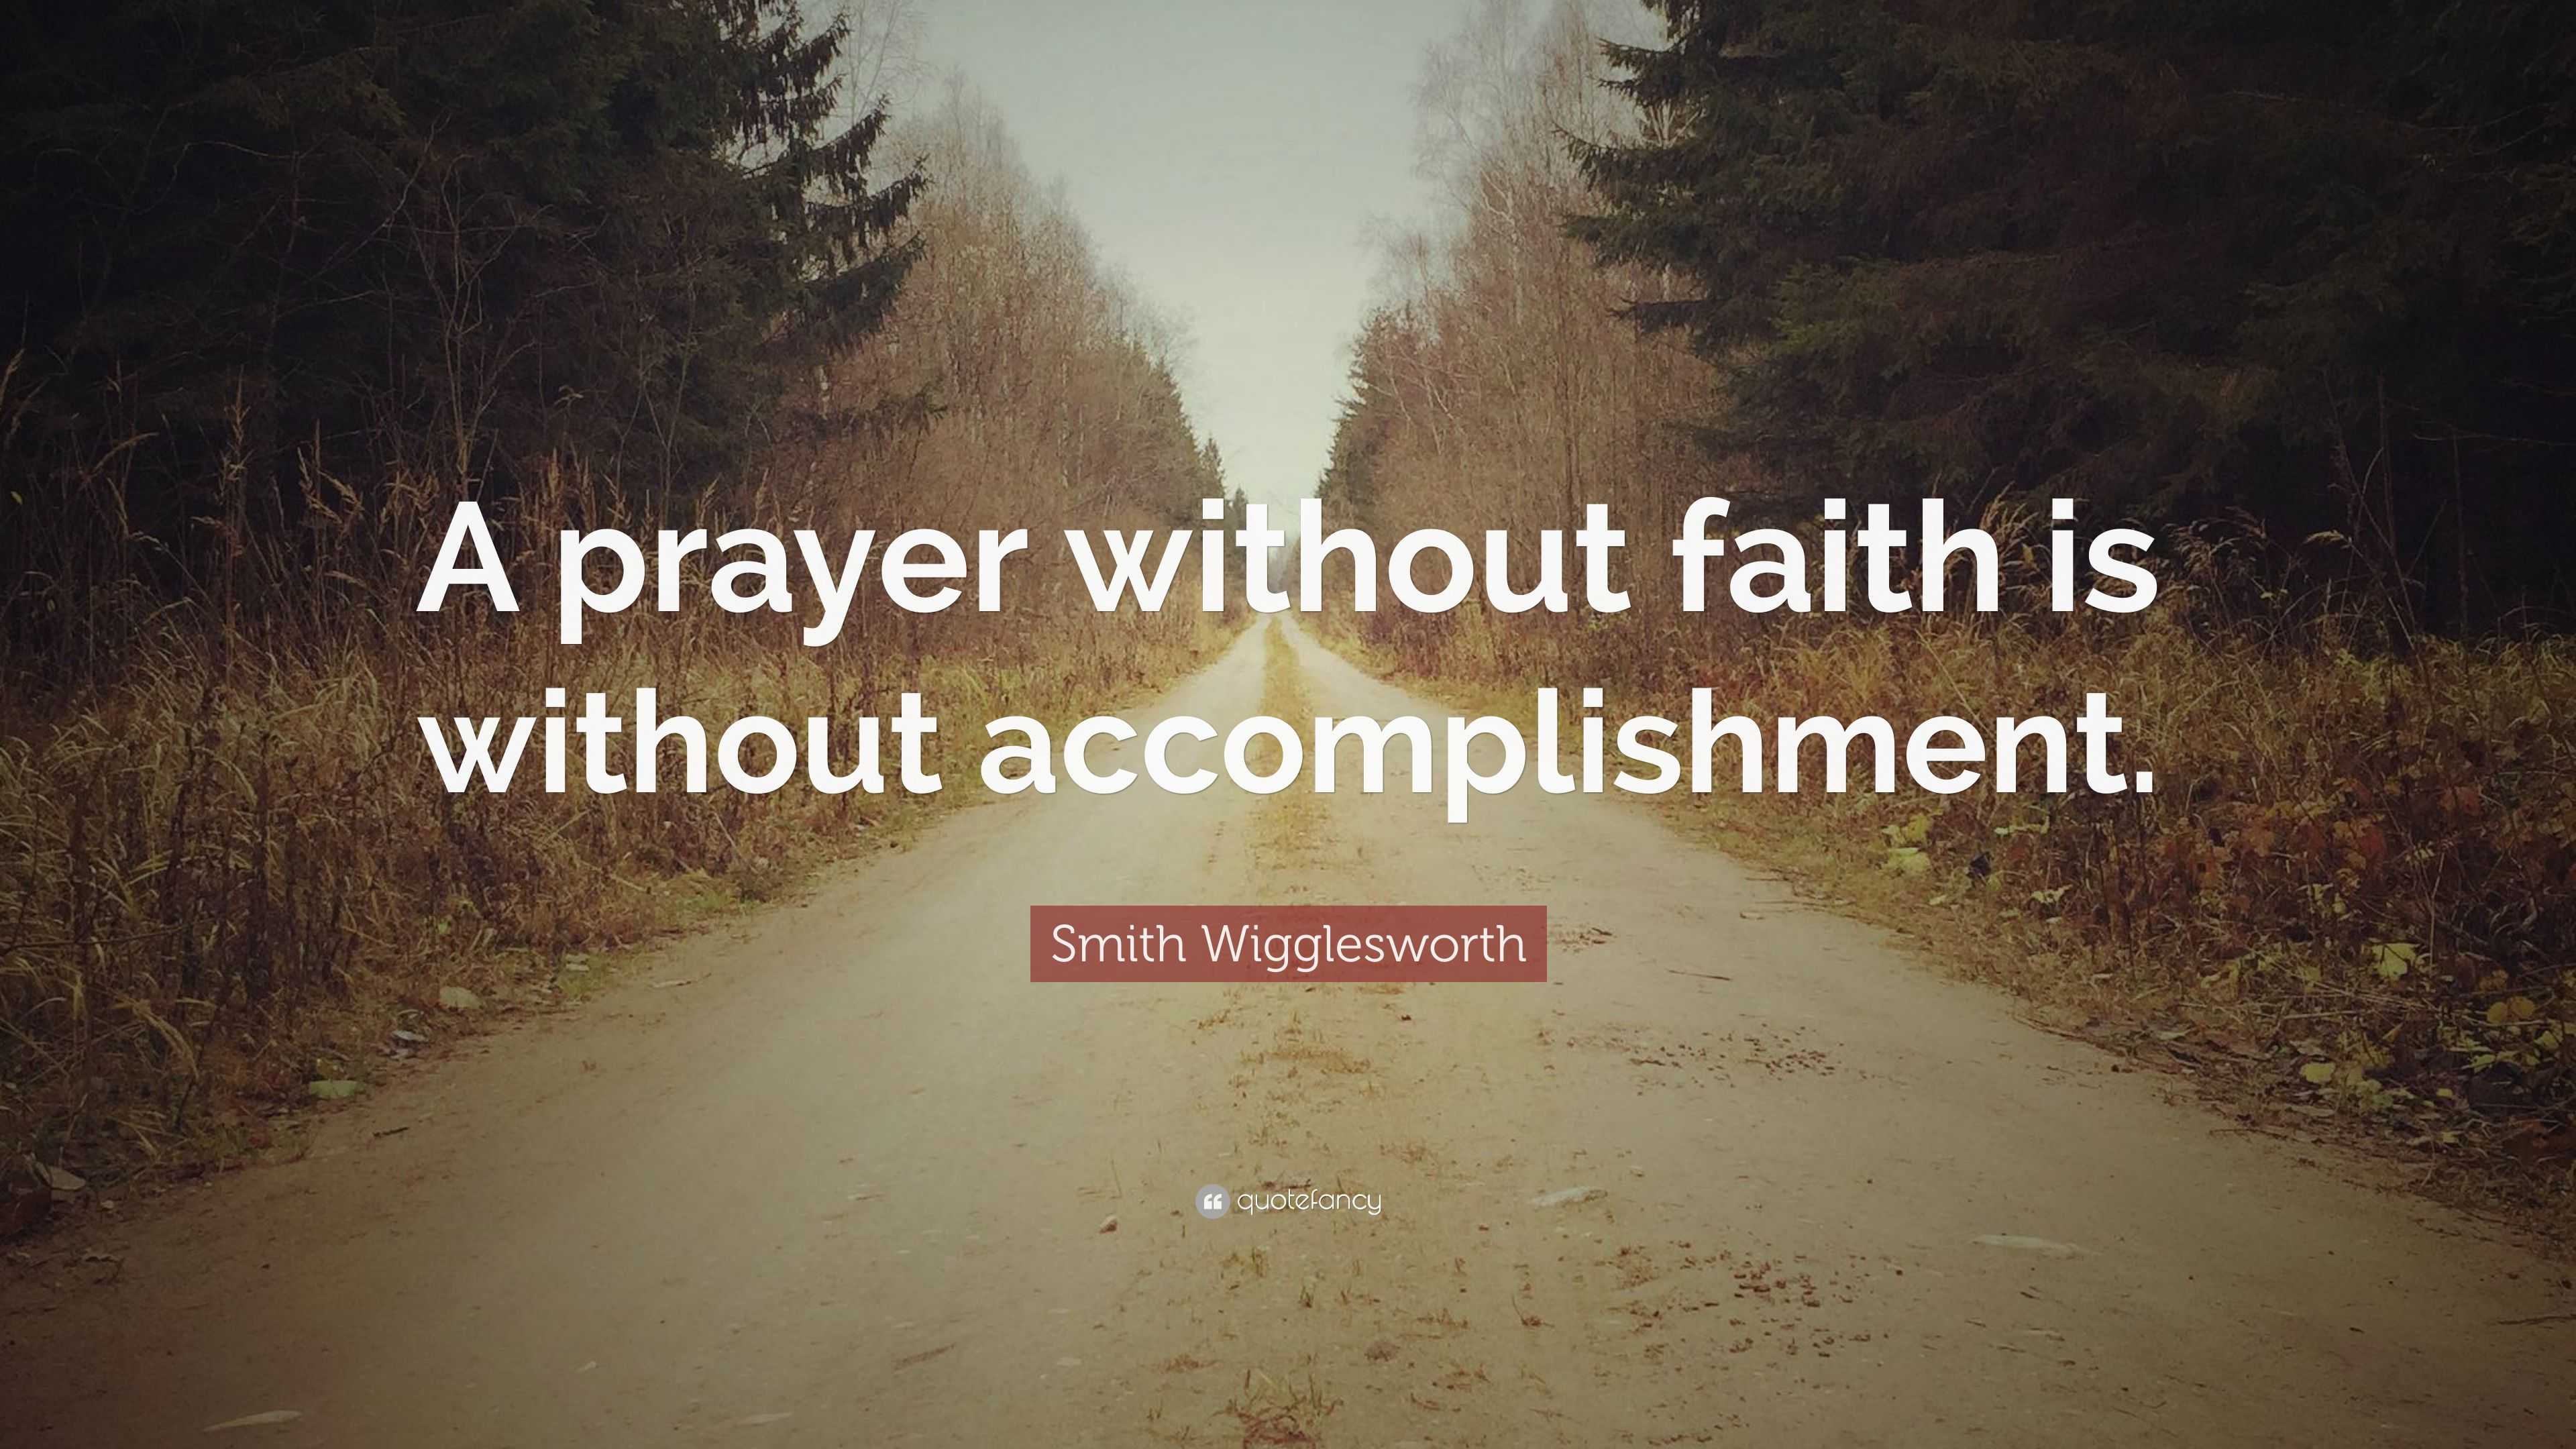 2328987 Smith Wigglesworth Quote A prayer without faith is without